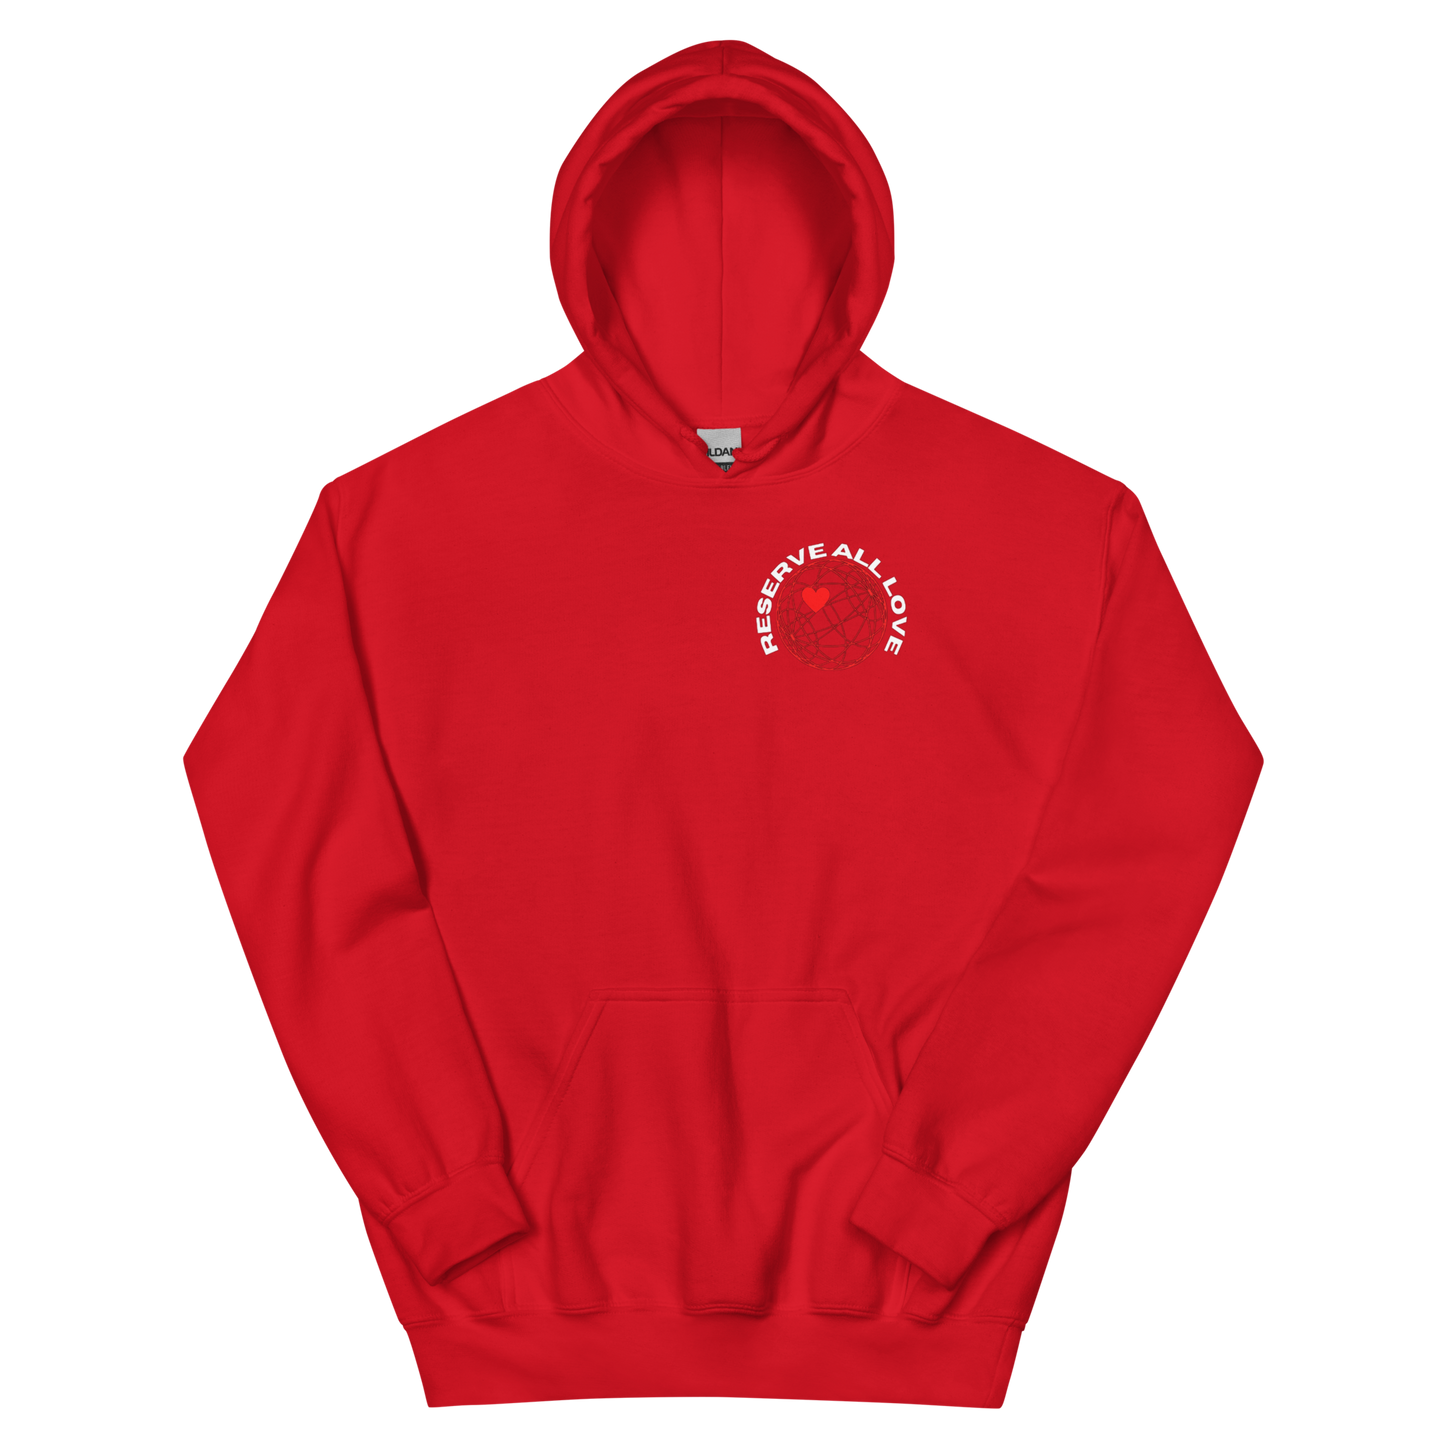 Reserve All Love Red Hoodie